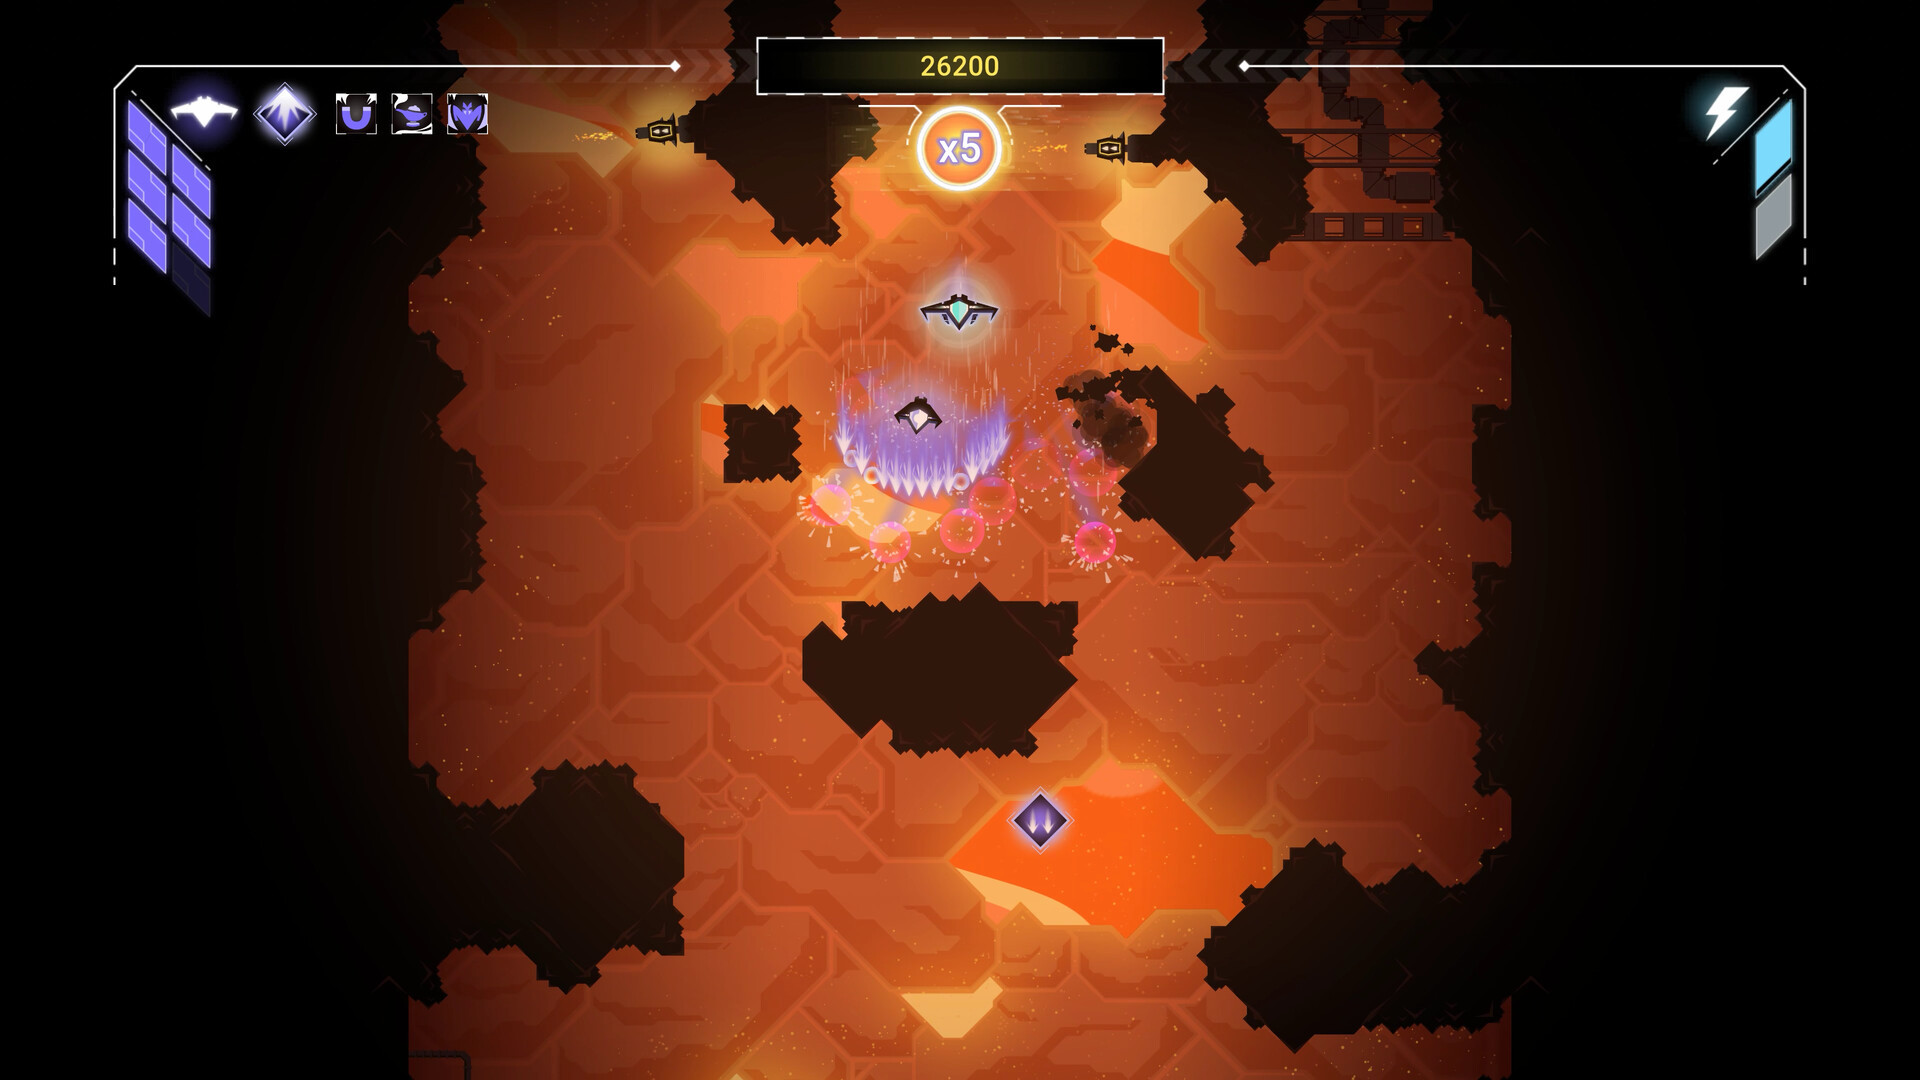 Caverns of Mars Recharged co-op